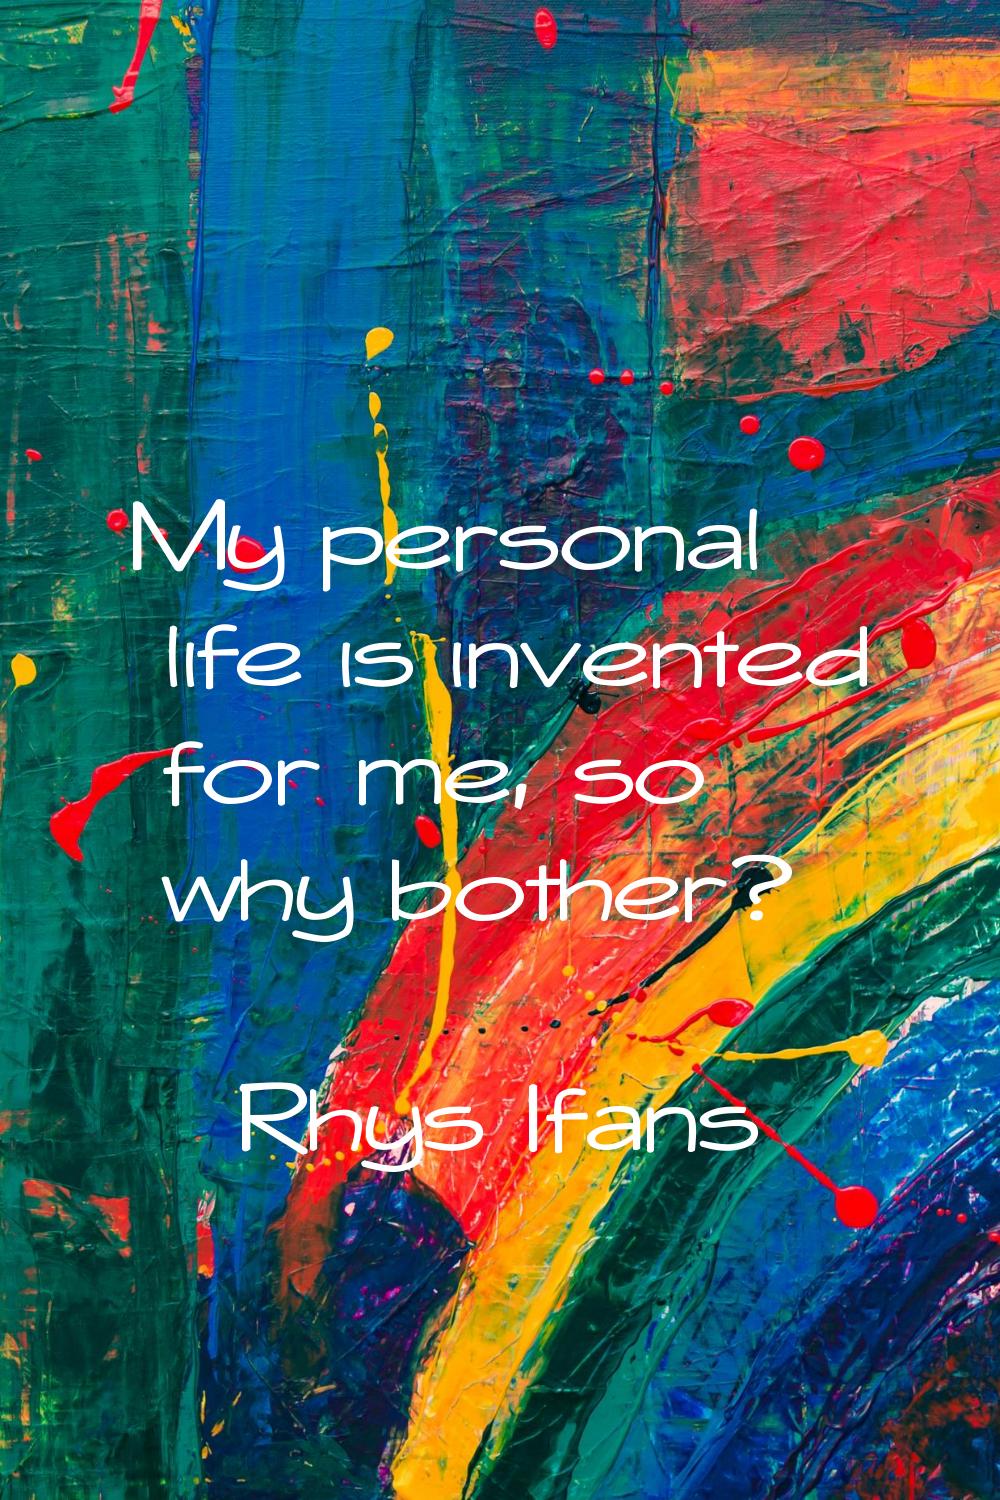 My personal life is invented for me, so why bother?